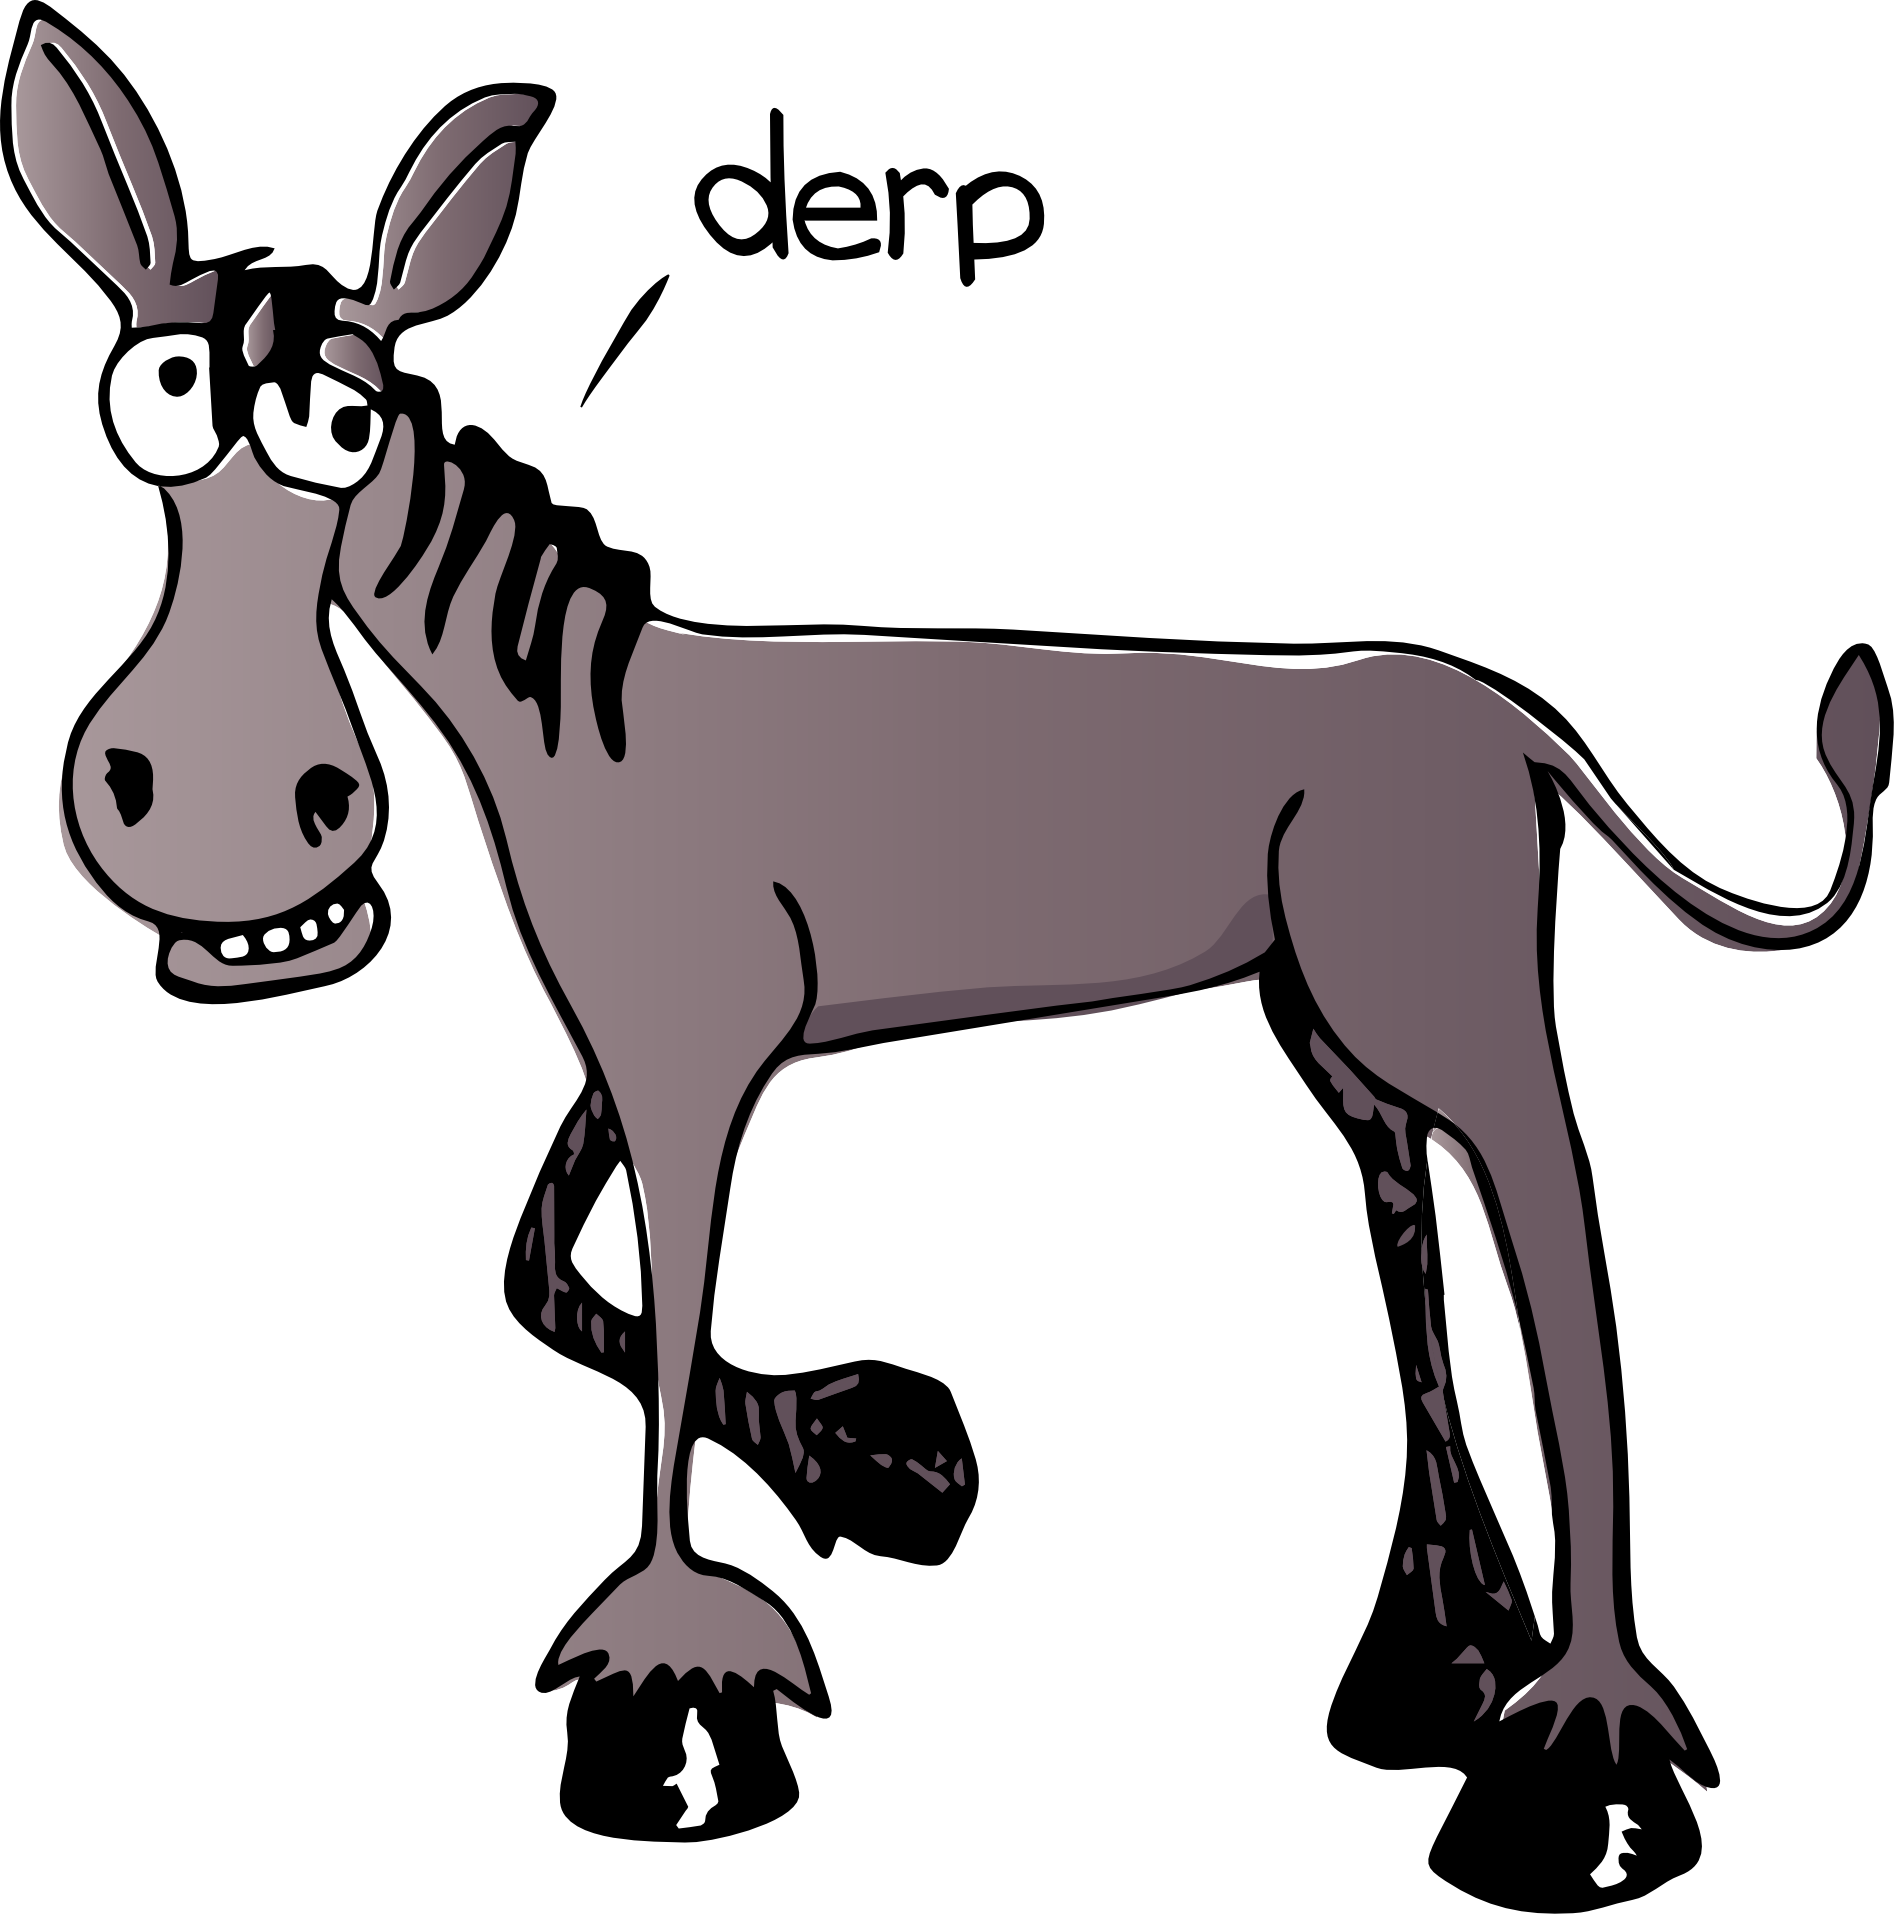 Derp The Donkey (1896x1920)